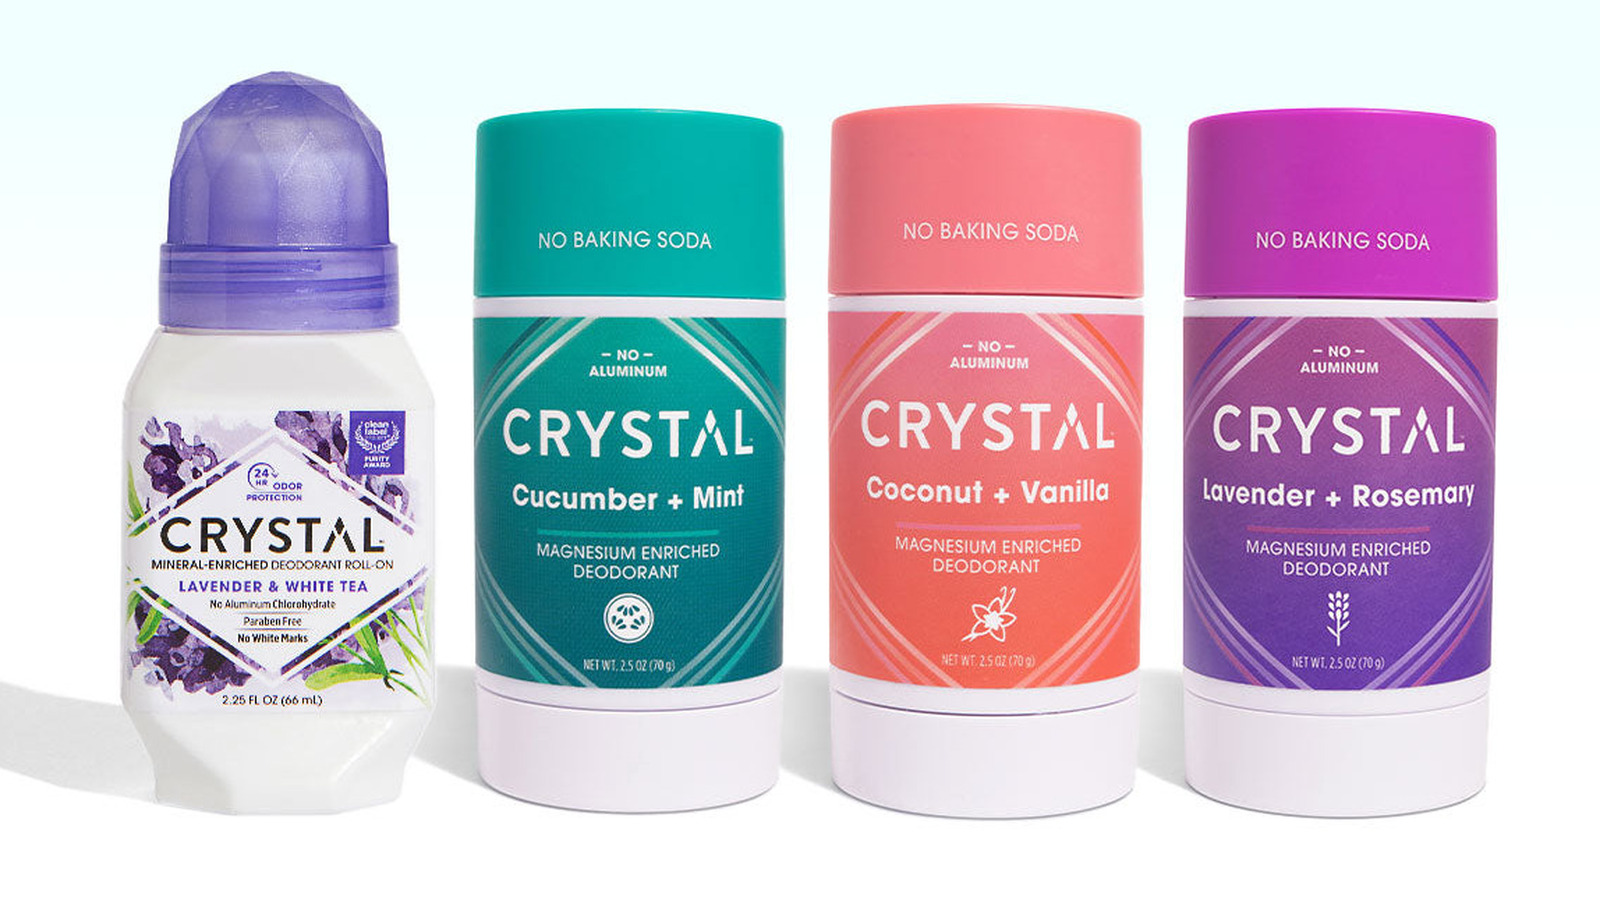 Does Crystal Deodorant Live Up To The Hype? – Glam